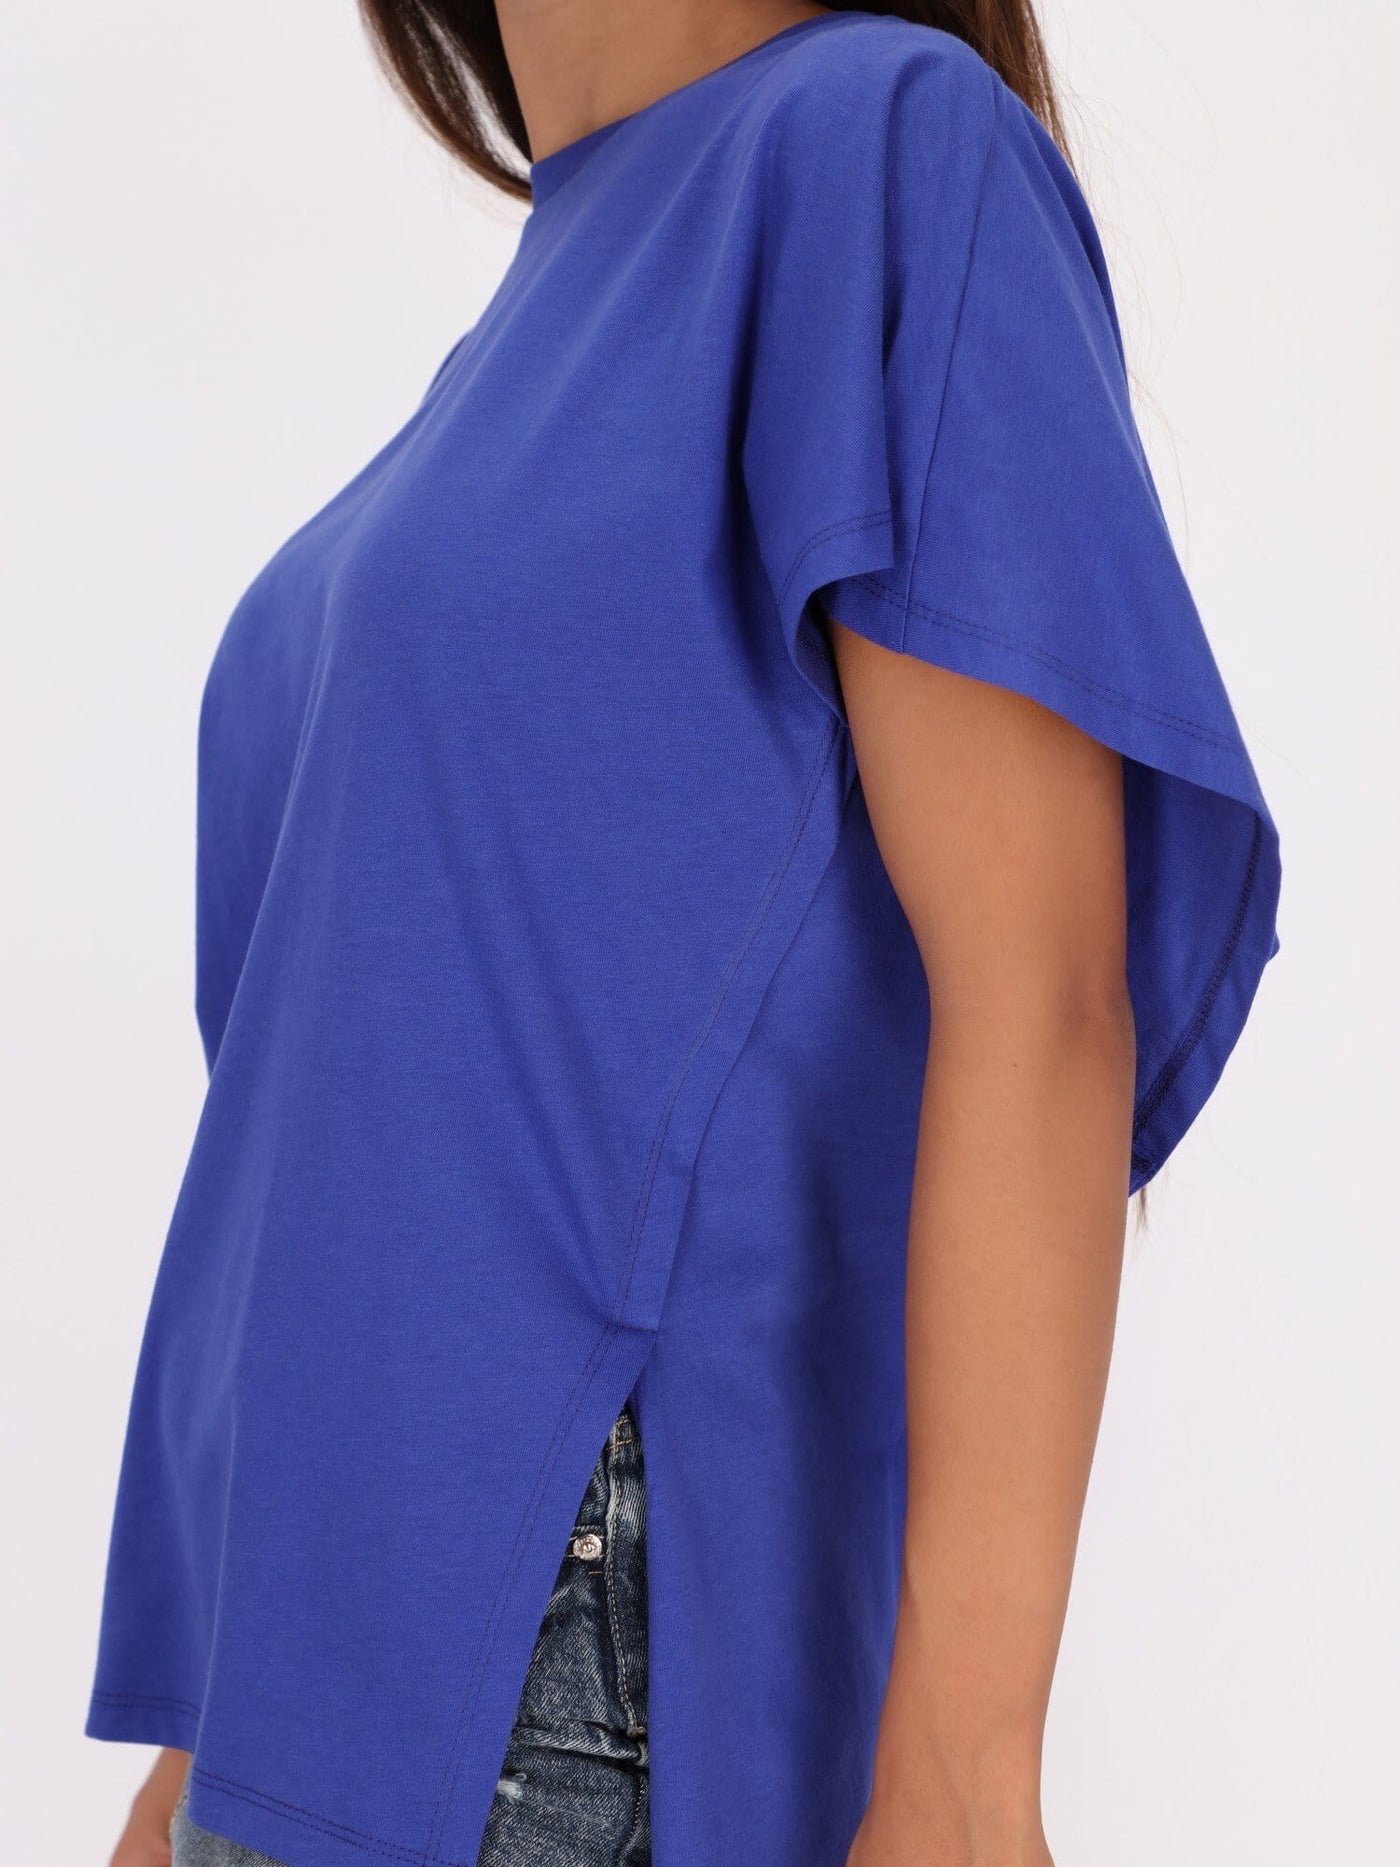 OR Tops & Blouses Cape Sleeve T-shirt